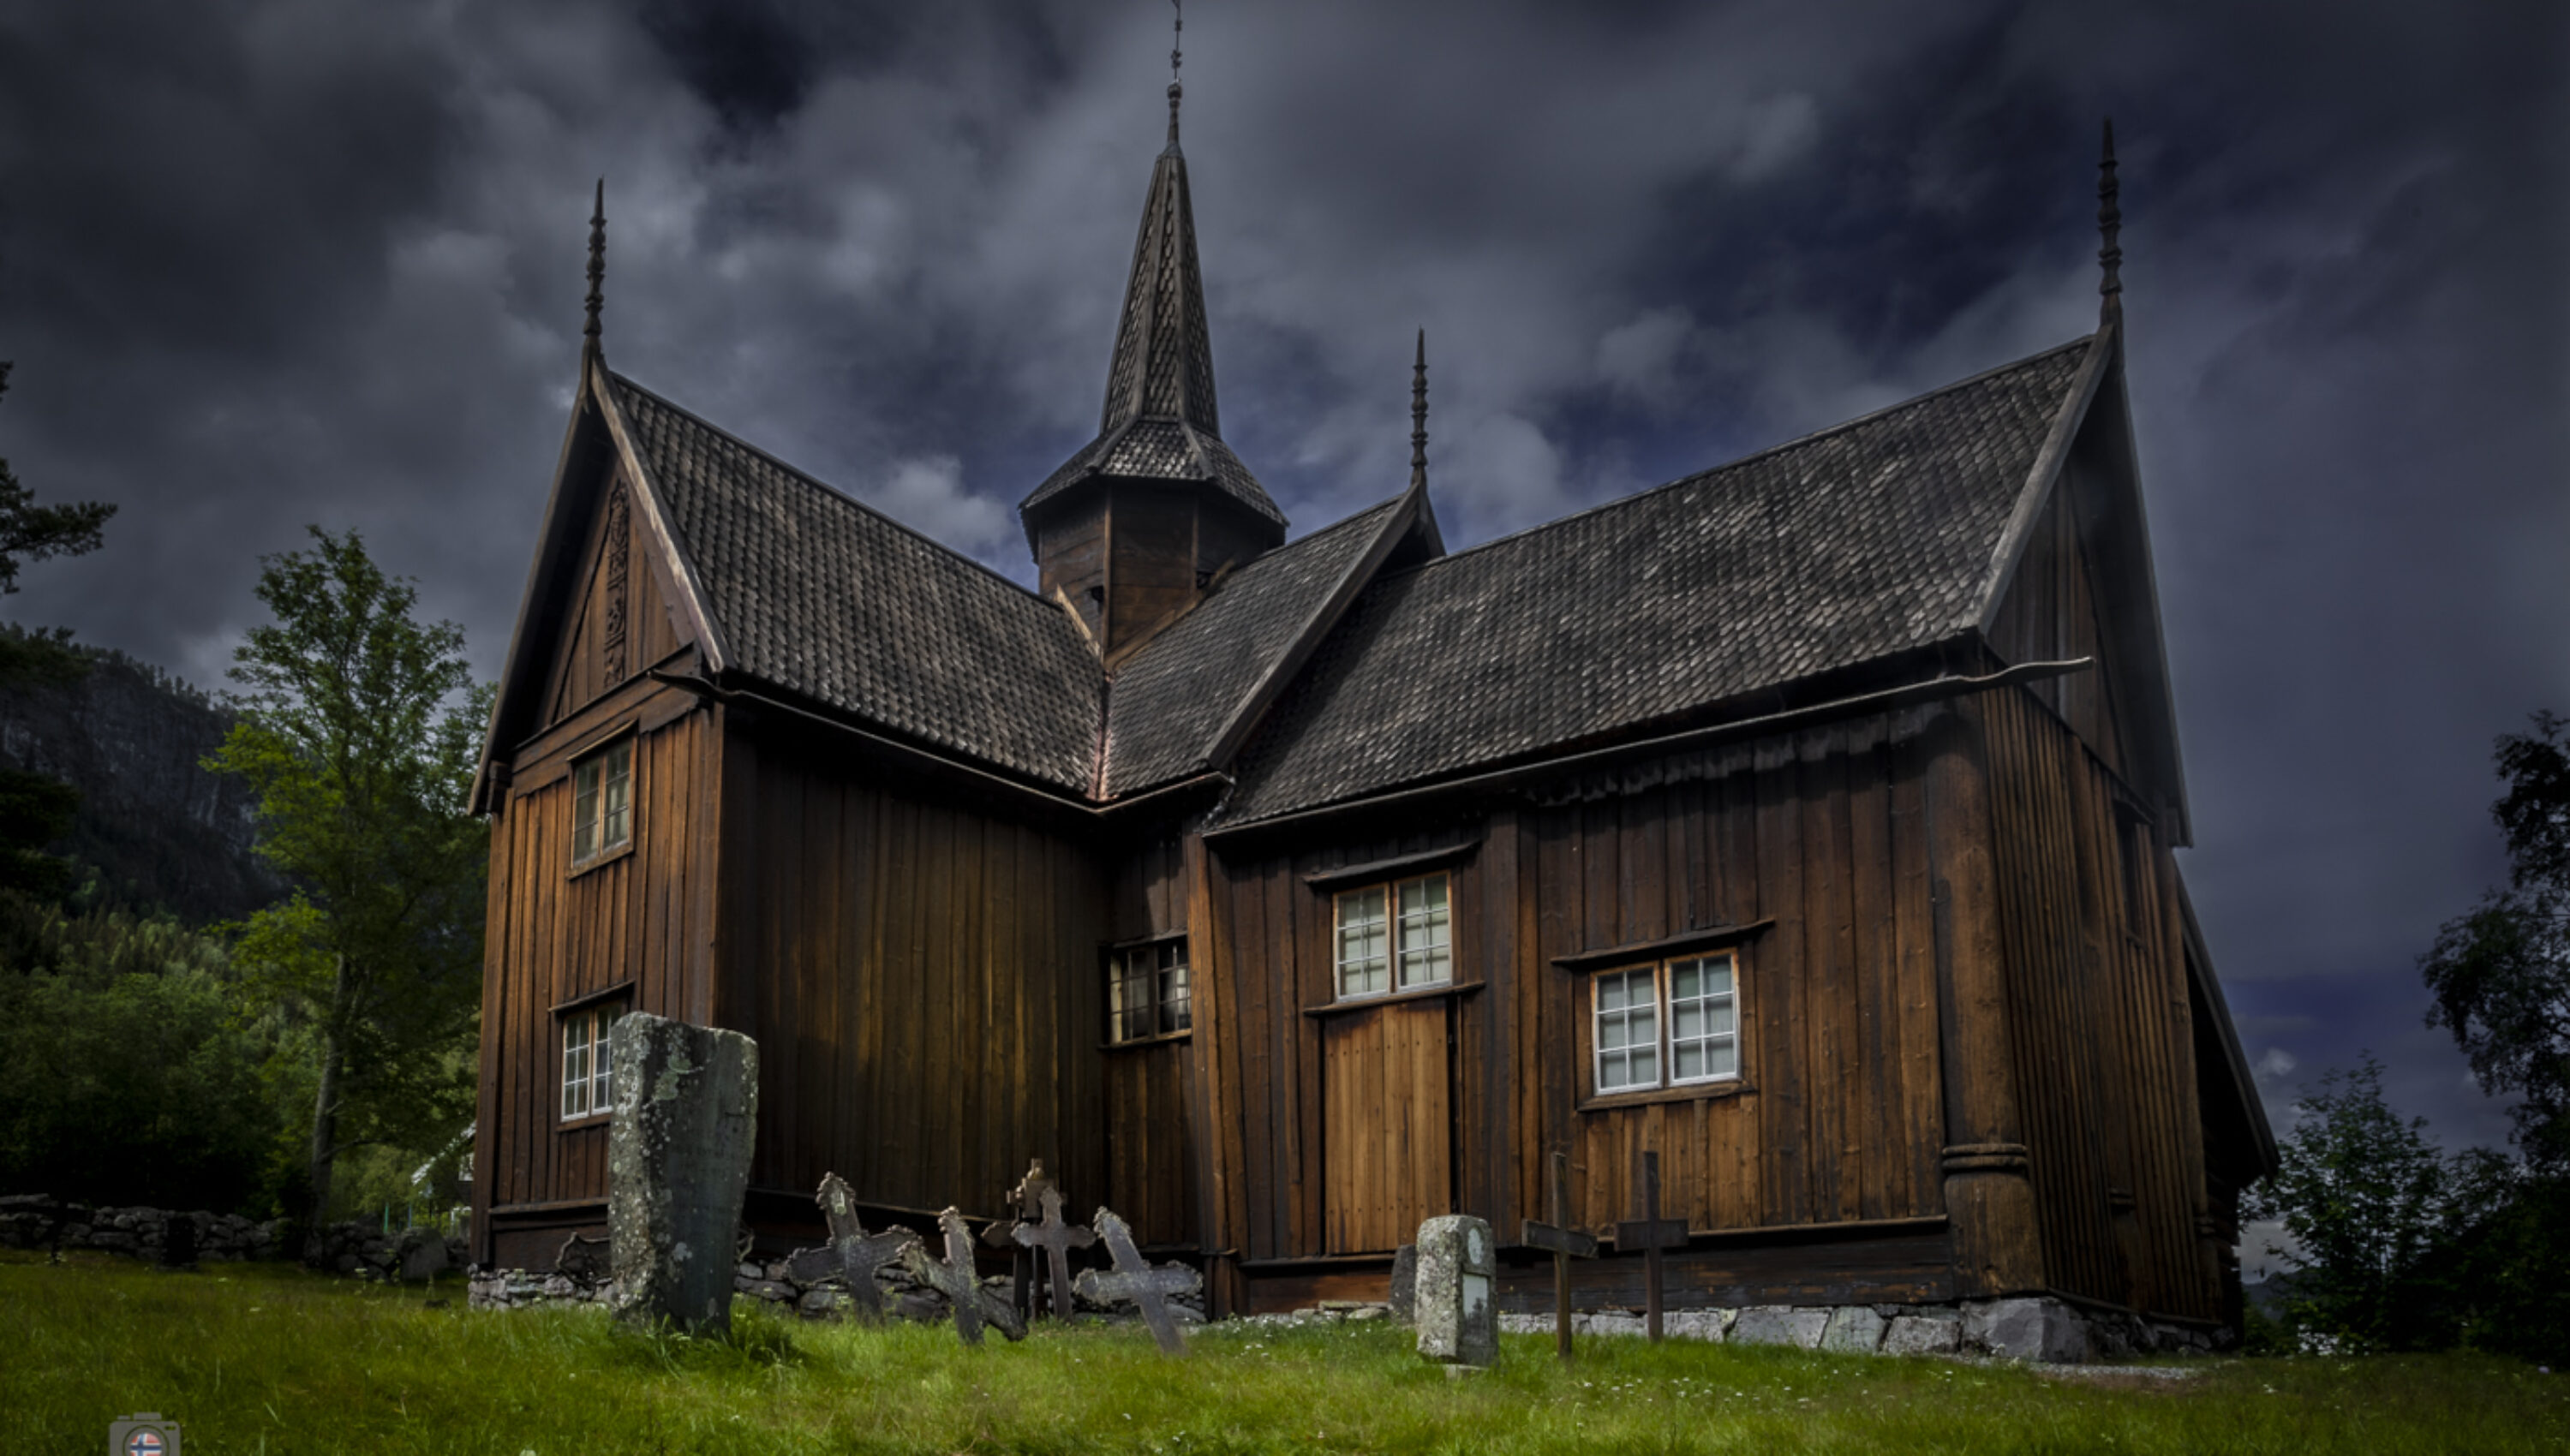 The Nore Stave Church